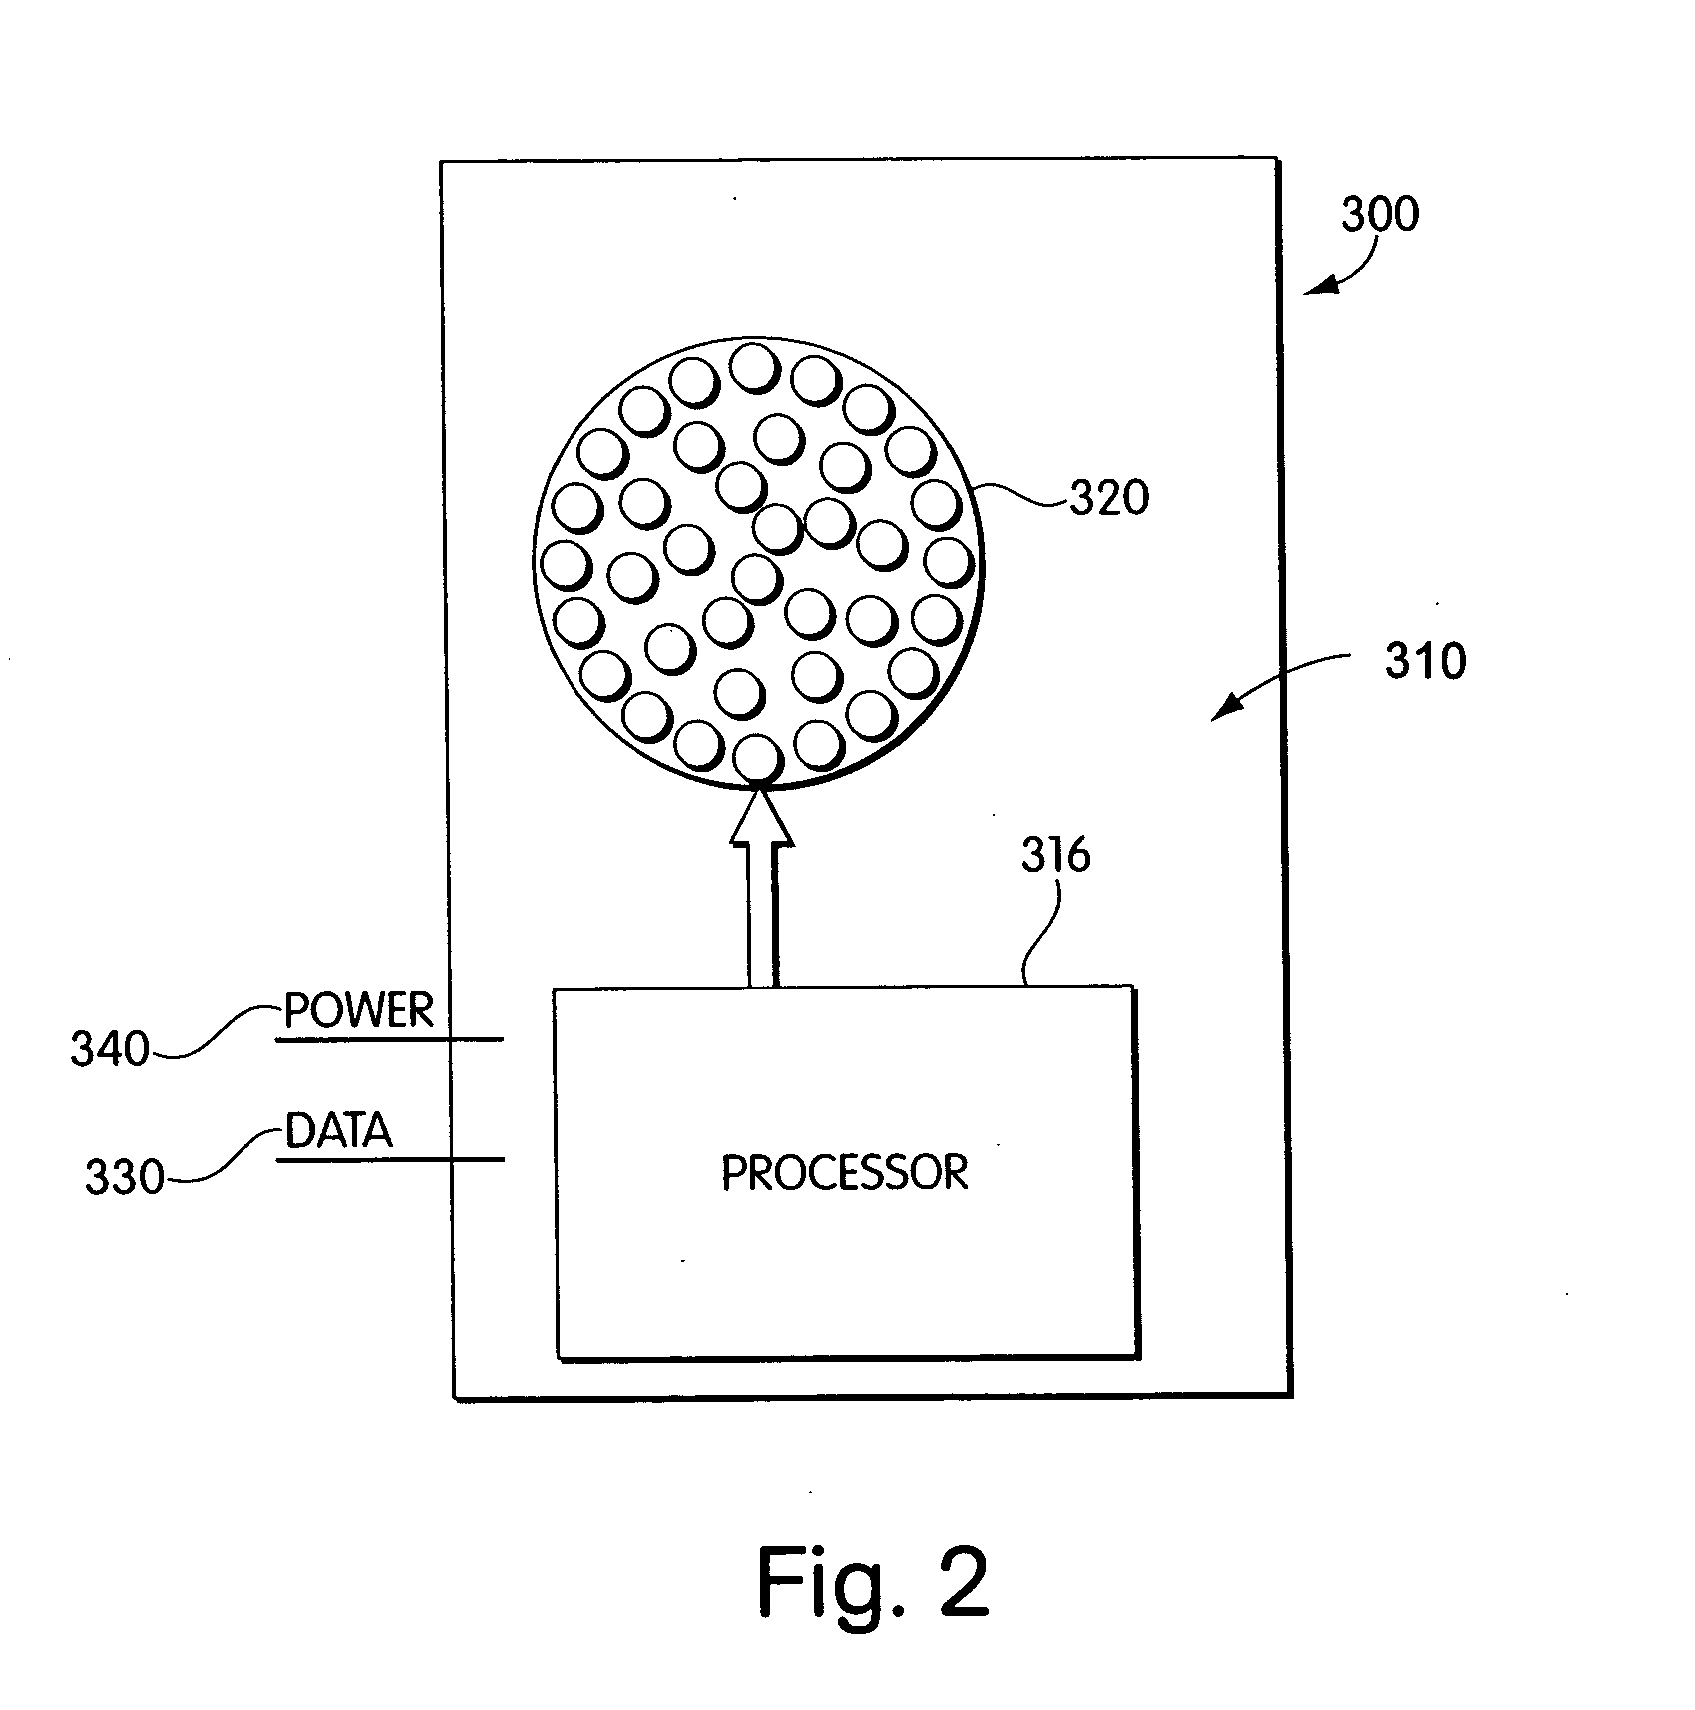 Methods and apparatus for generating and modulating illumination conditions